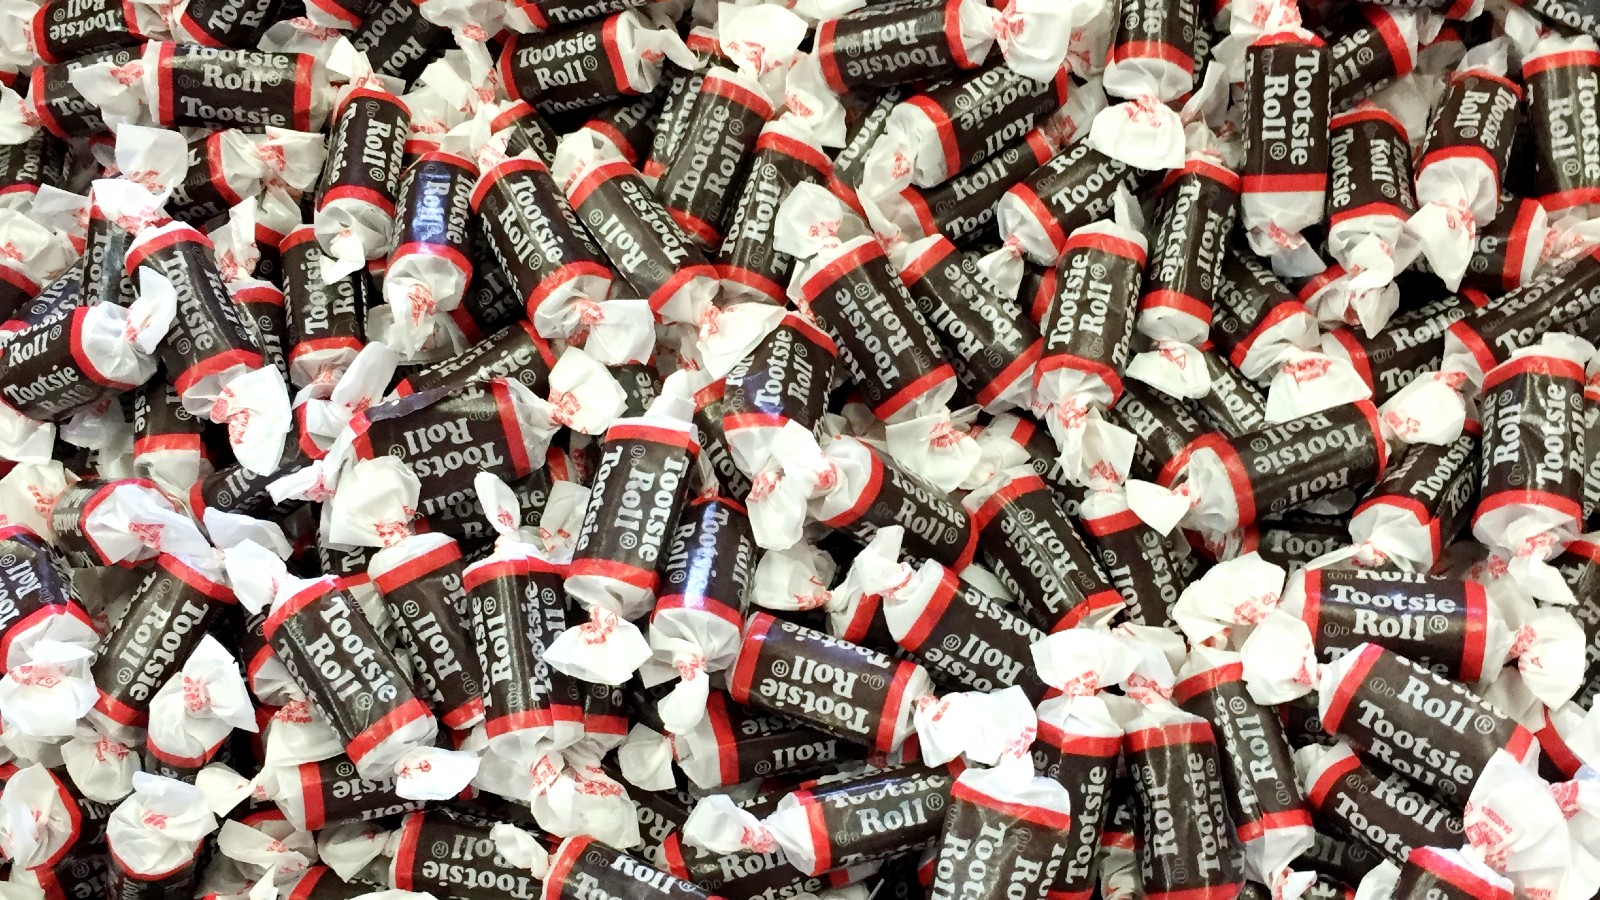 The Jewish History of Tootsie Rolls and Other Classic American